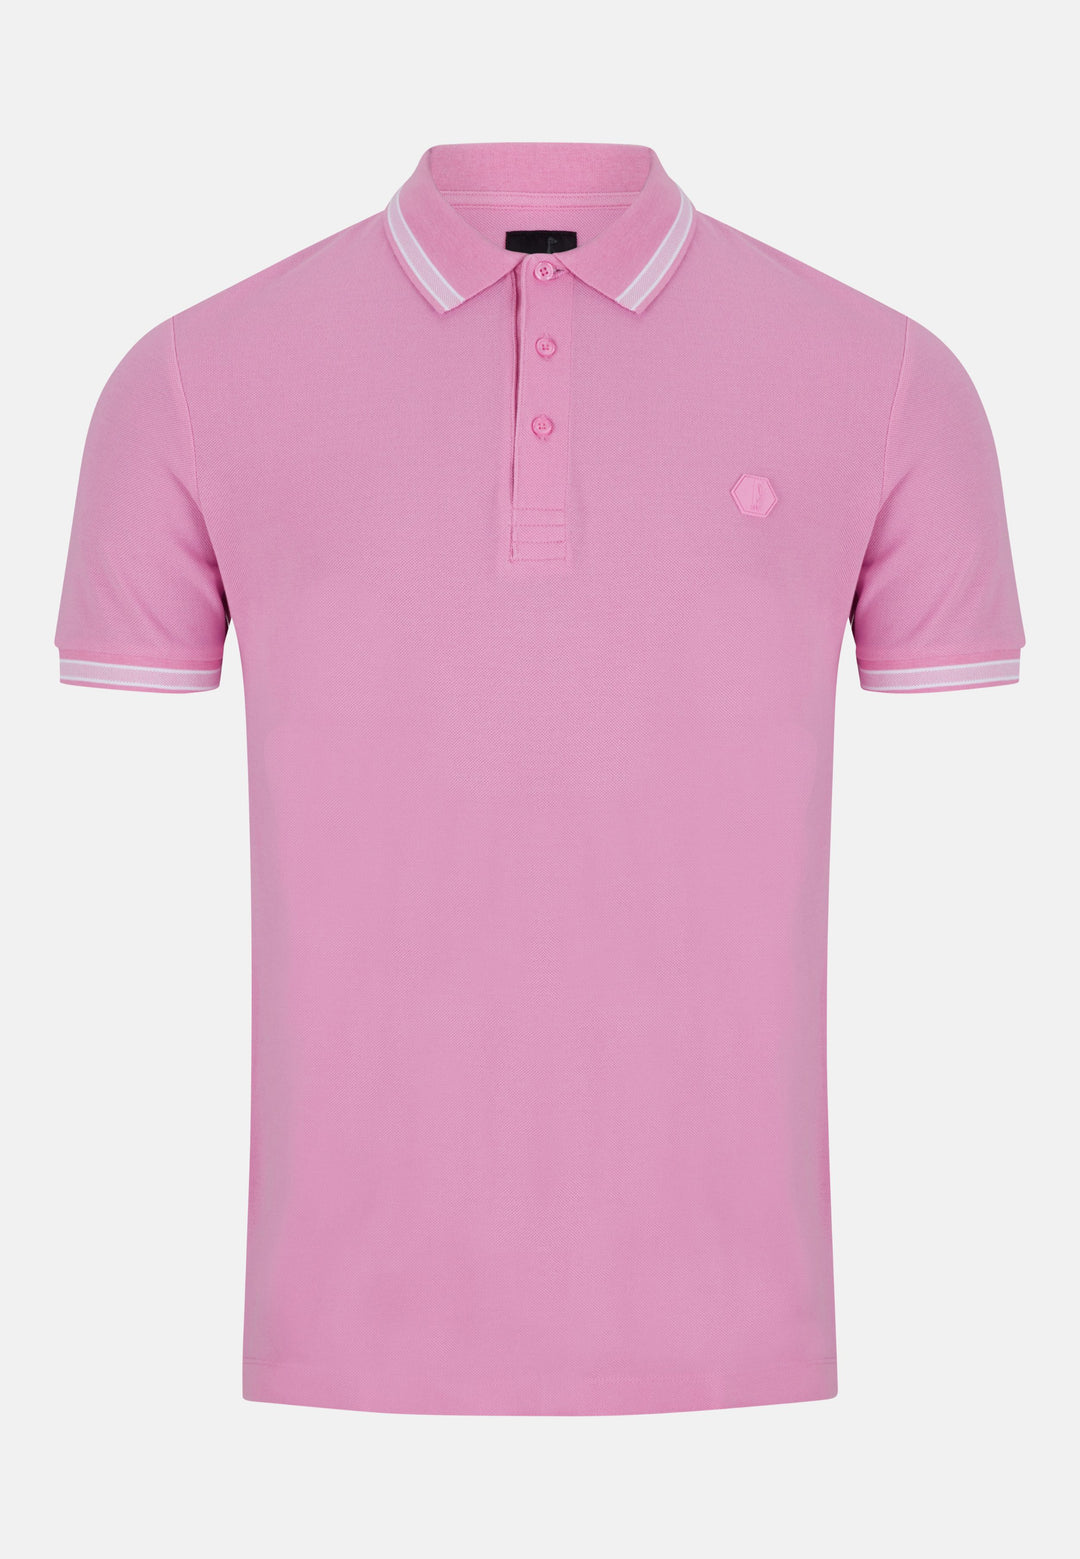 A men's regular-fit Polo Shirt in Pink with contrasting white stripe on collar and cuff from 6th Sense's Patrick Polo collection. 